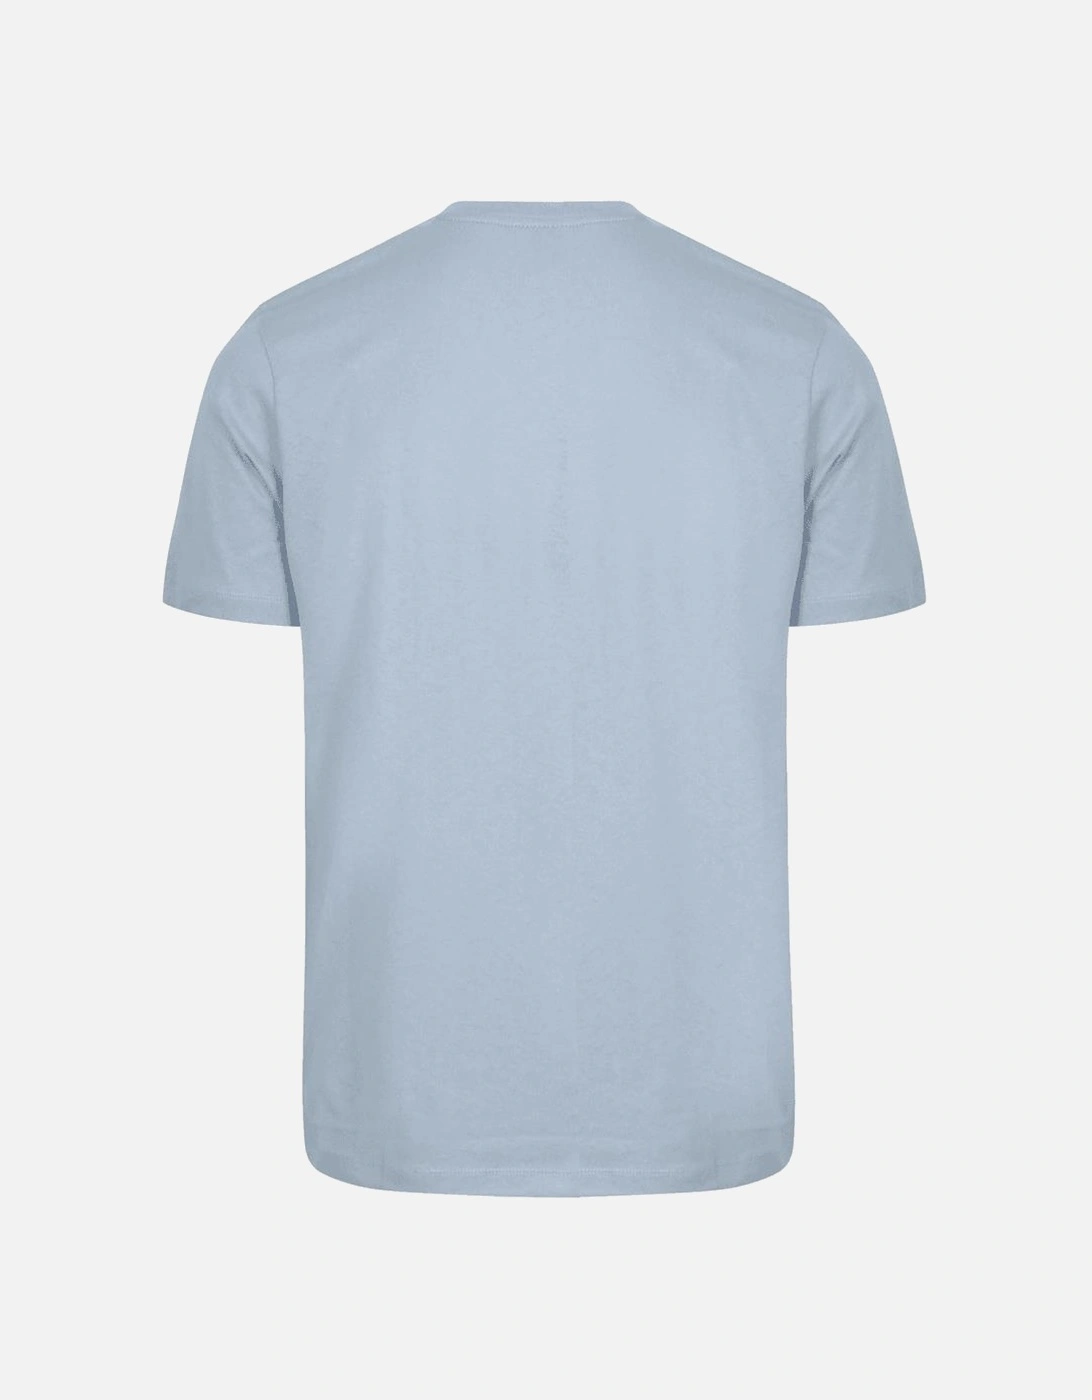 Tales Cotton Relaxed Fit Light Blue T-Shirt